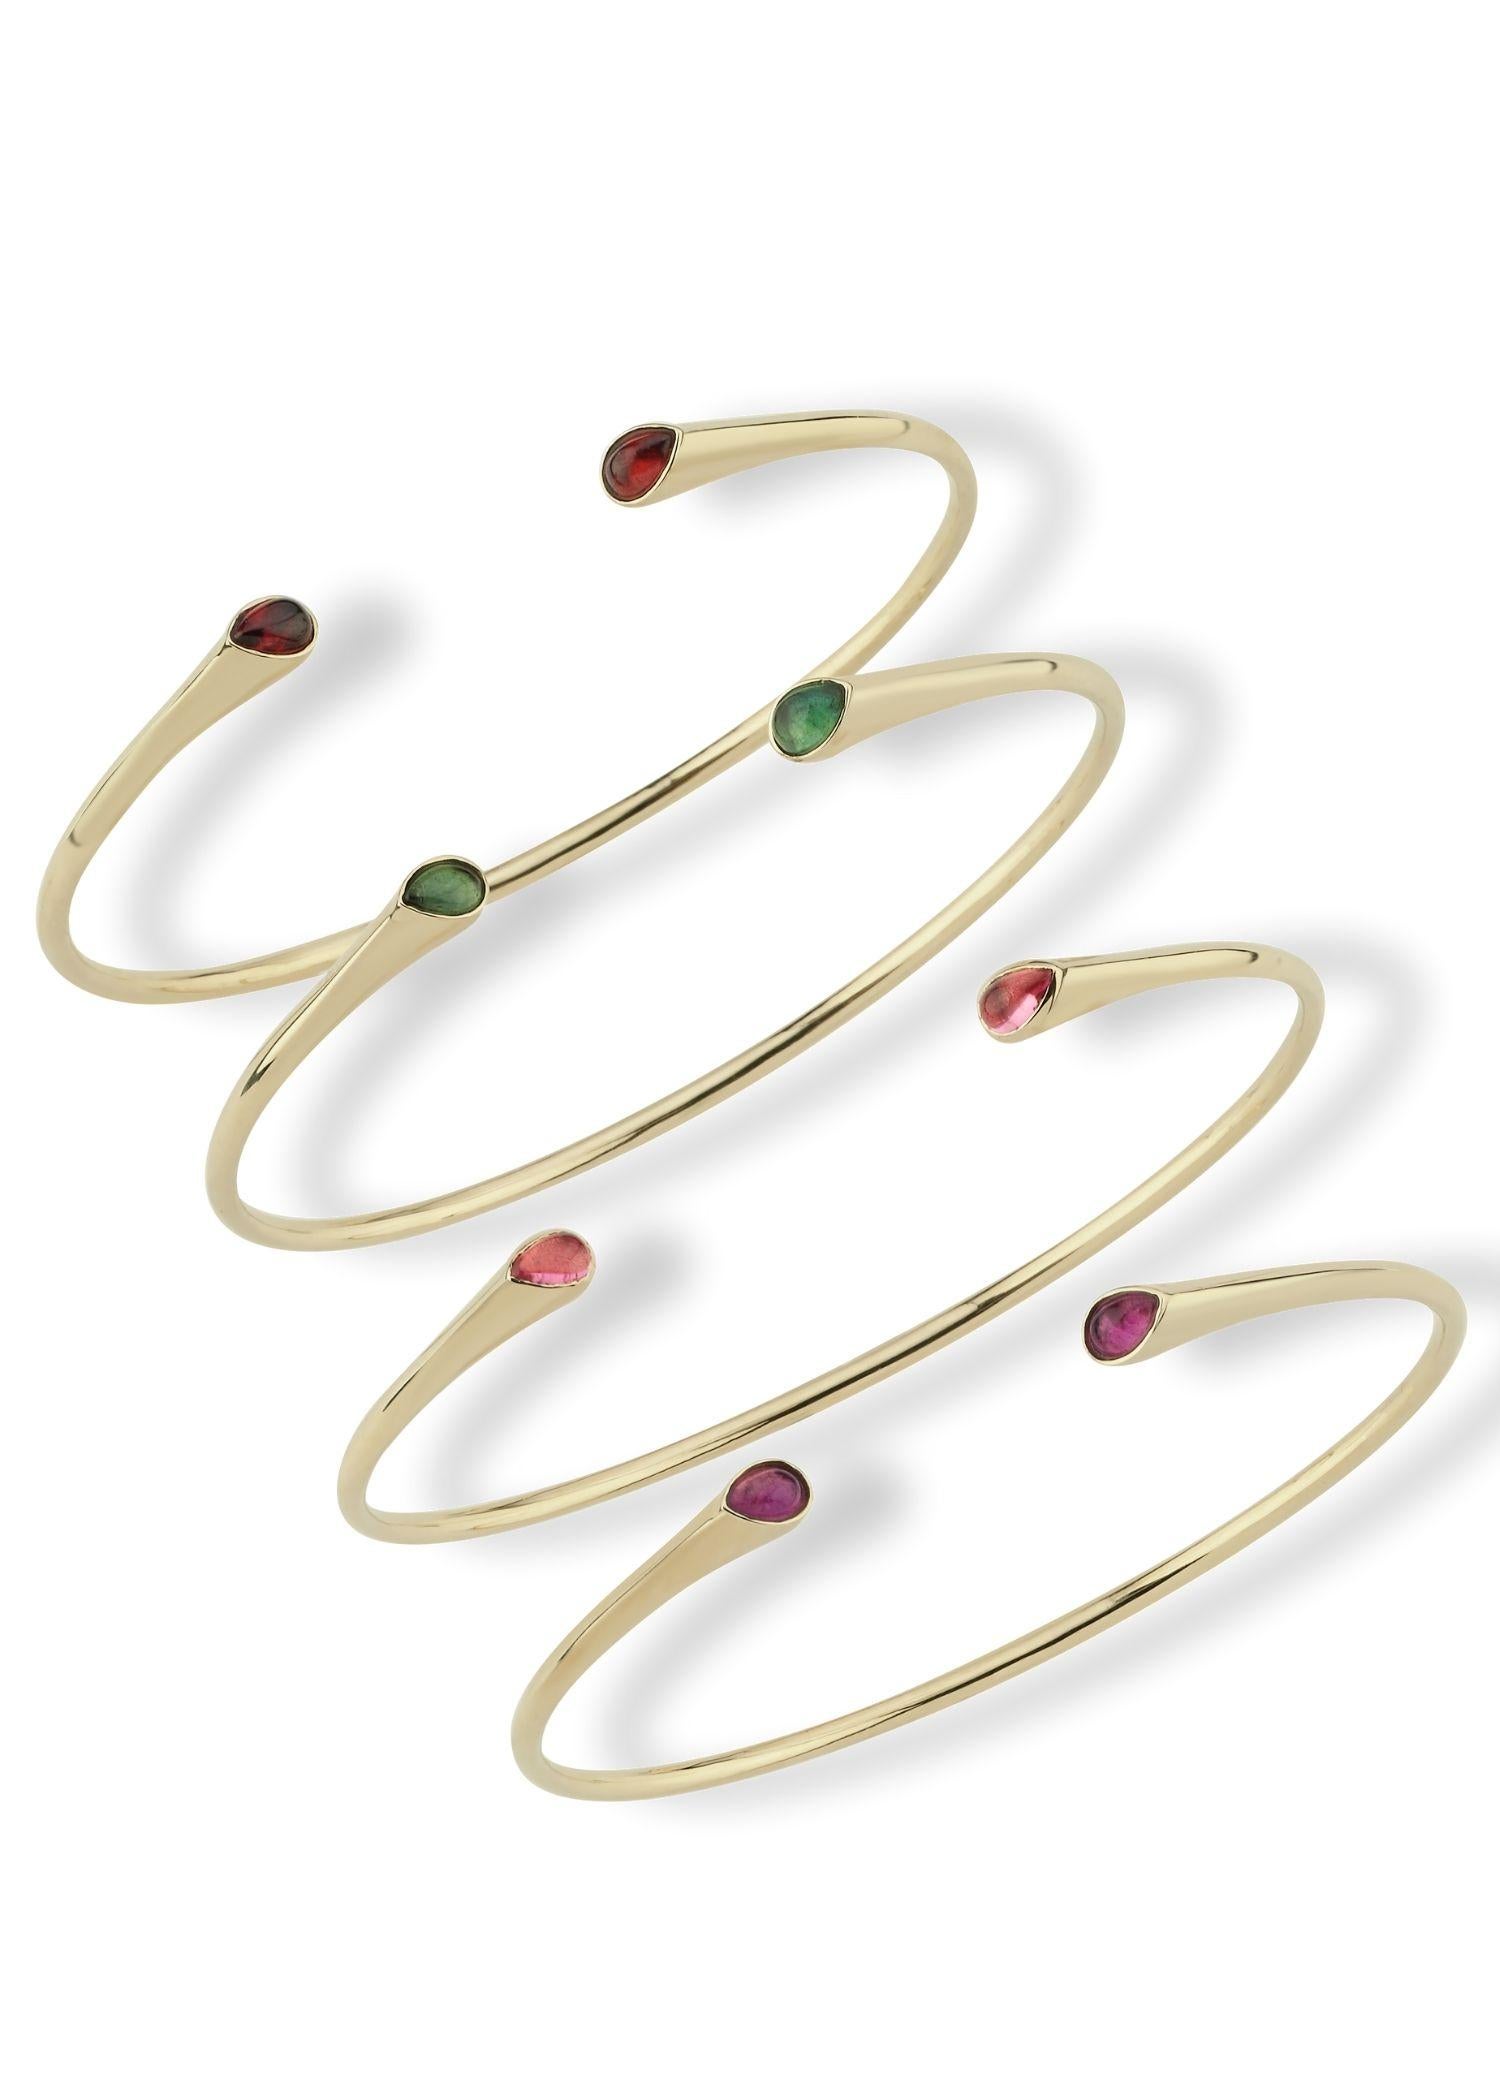 Melie Jewelry Gem Bracelet

14K Yellow Gold, 0.42 ct Tourmaline

The Story Behind
There is no other like the gold bracelet adorned with colorful gemstones and diamonds from Melie Jewelry's 